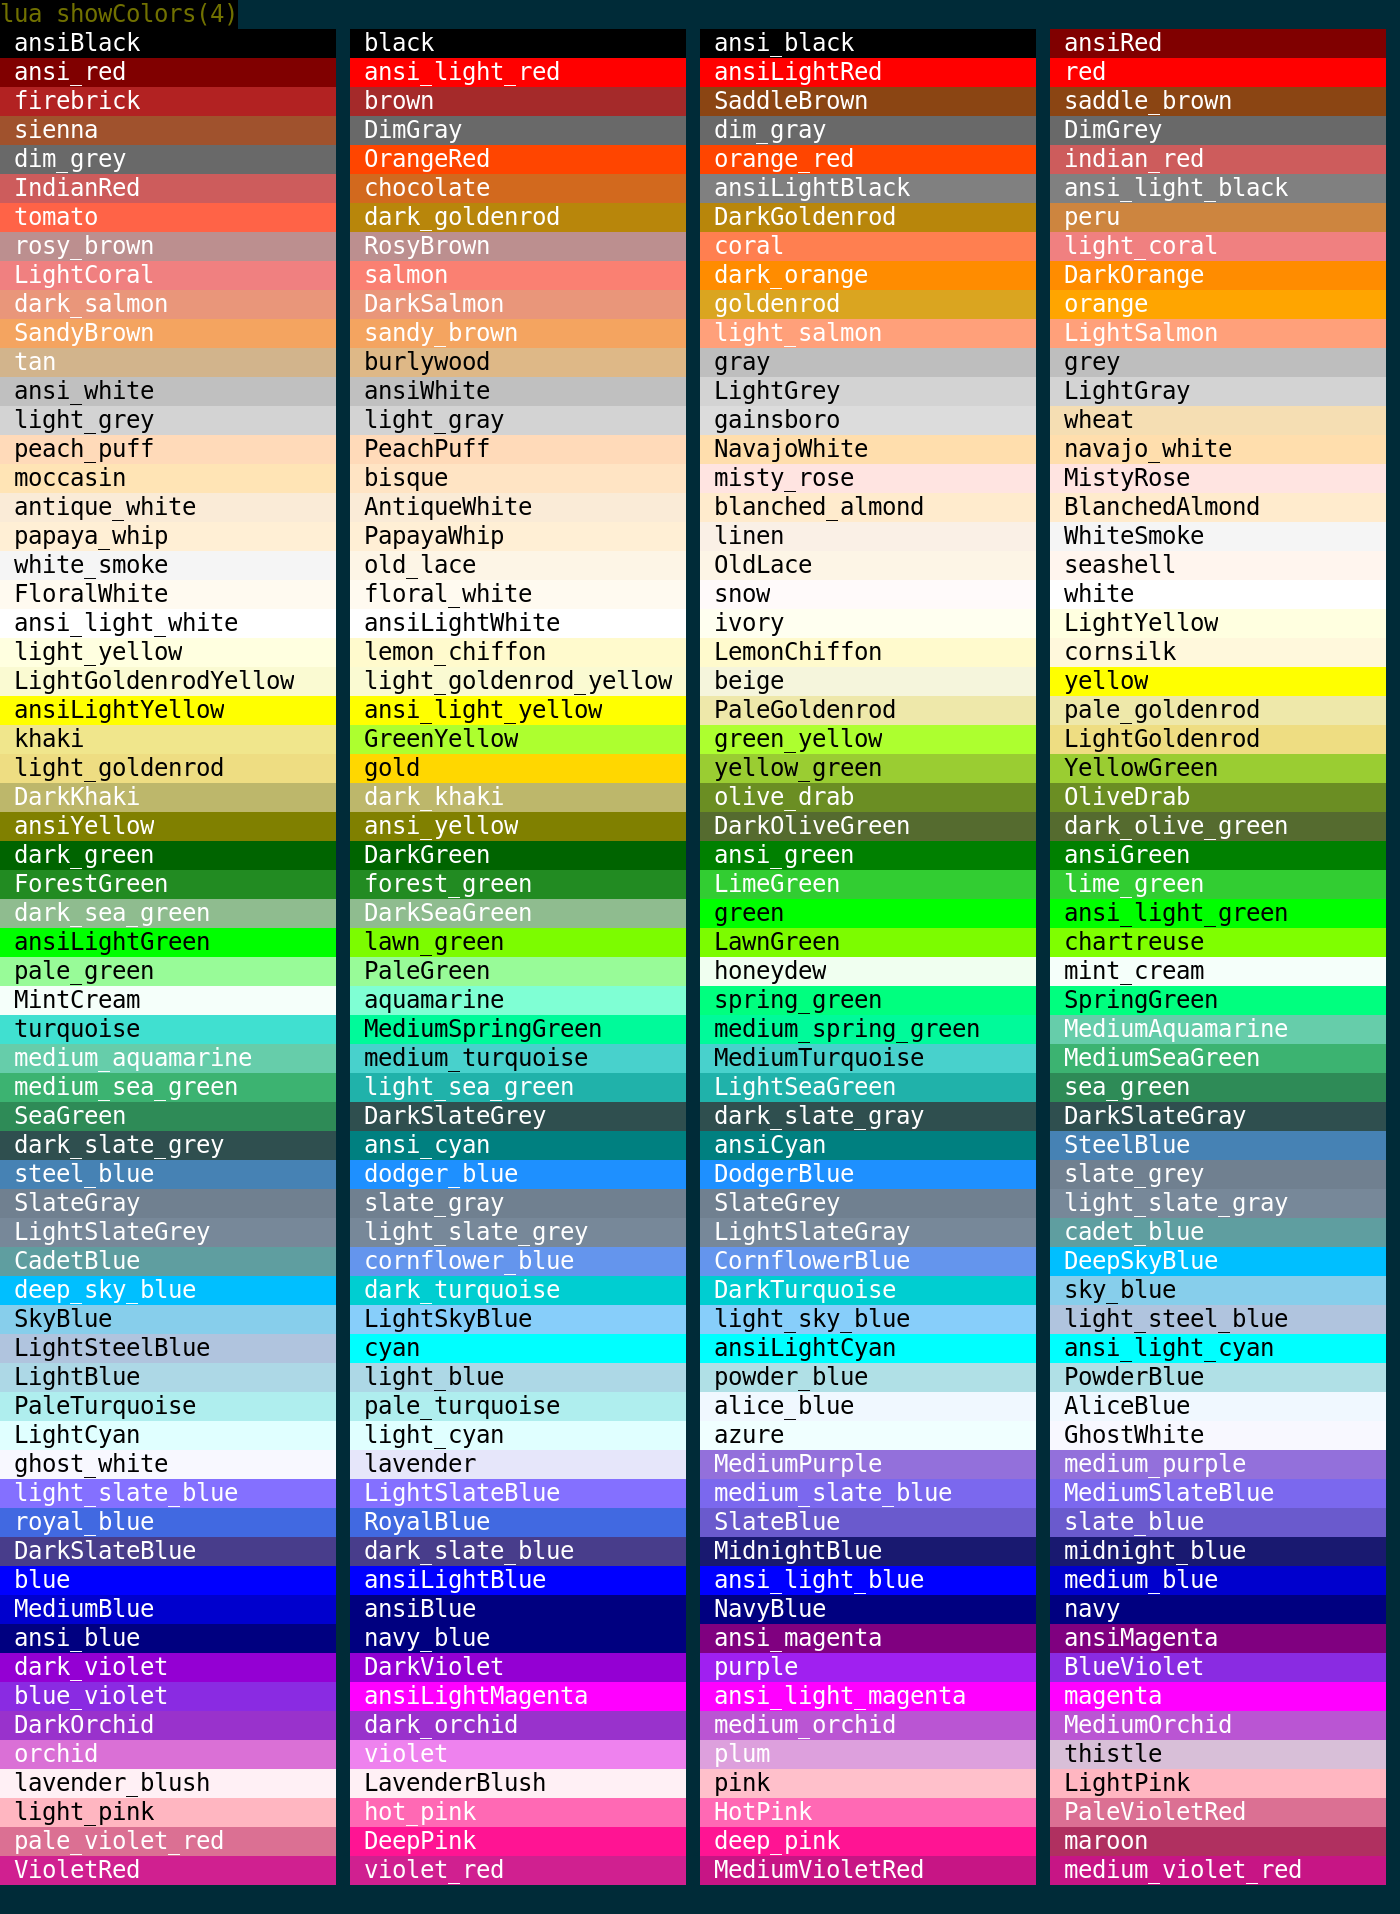 Named colors